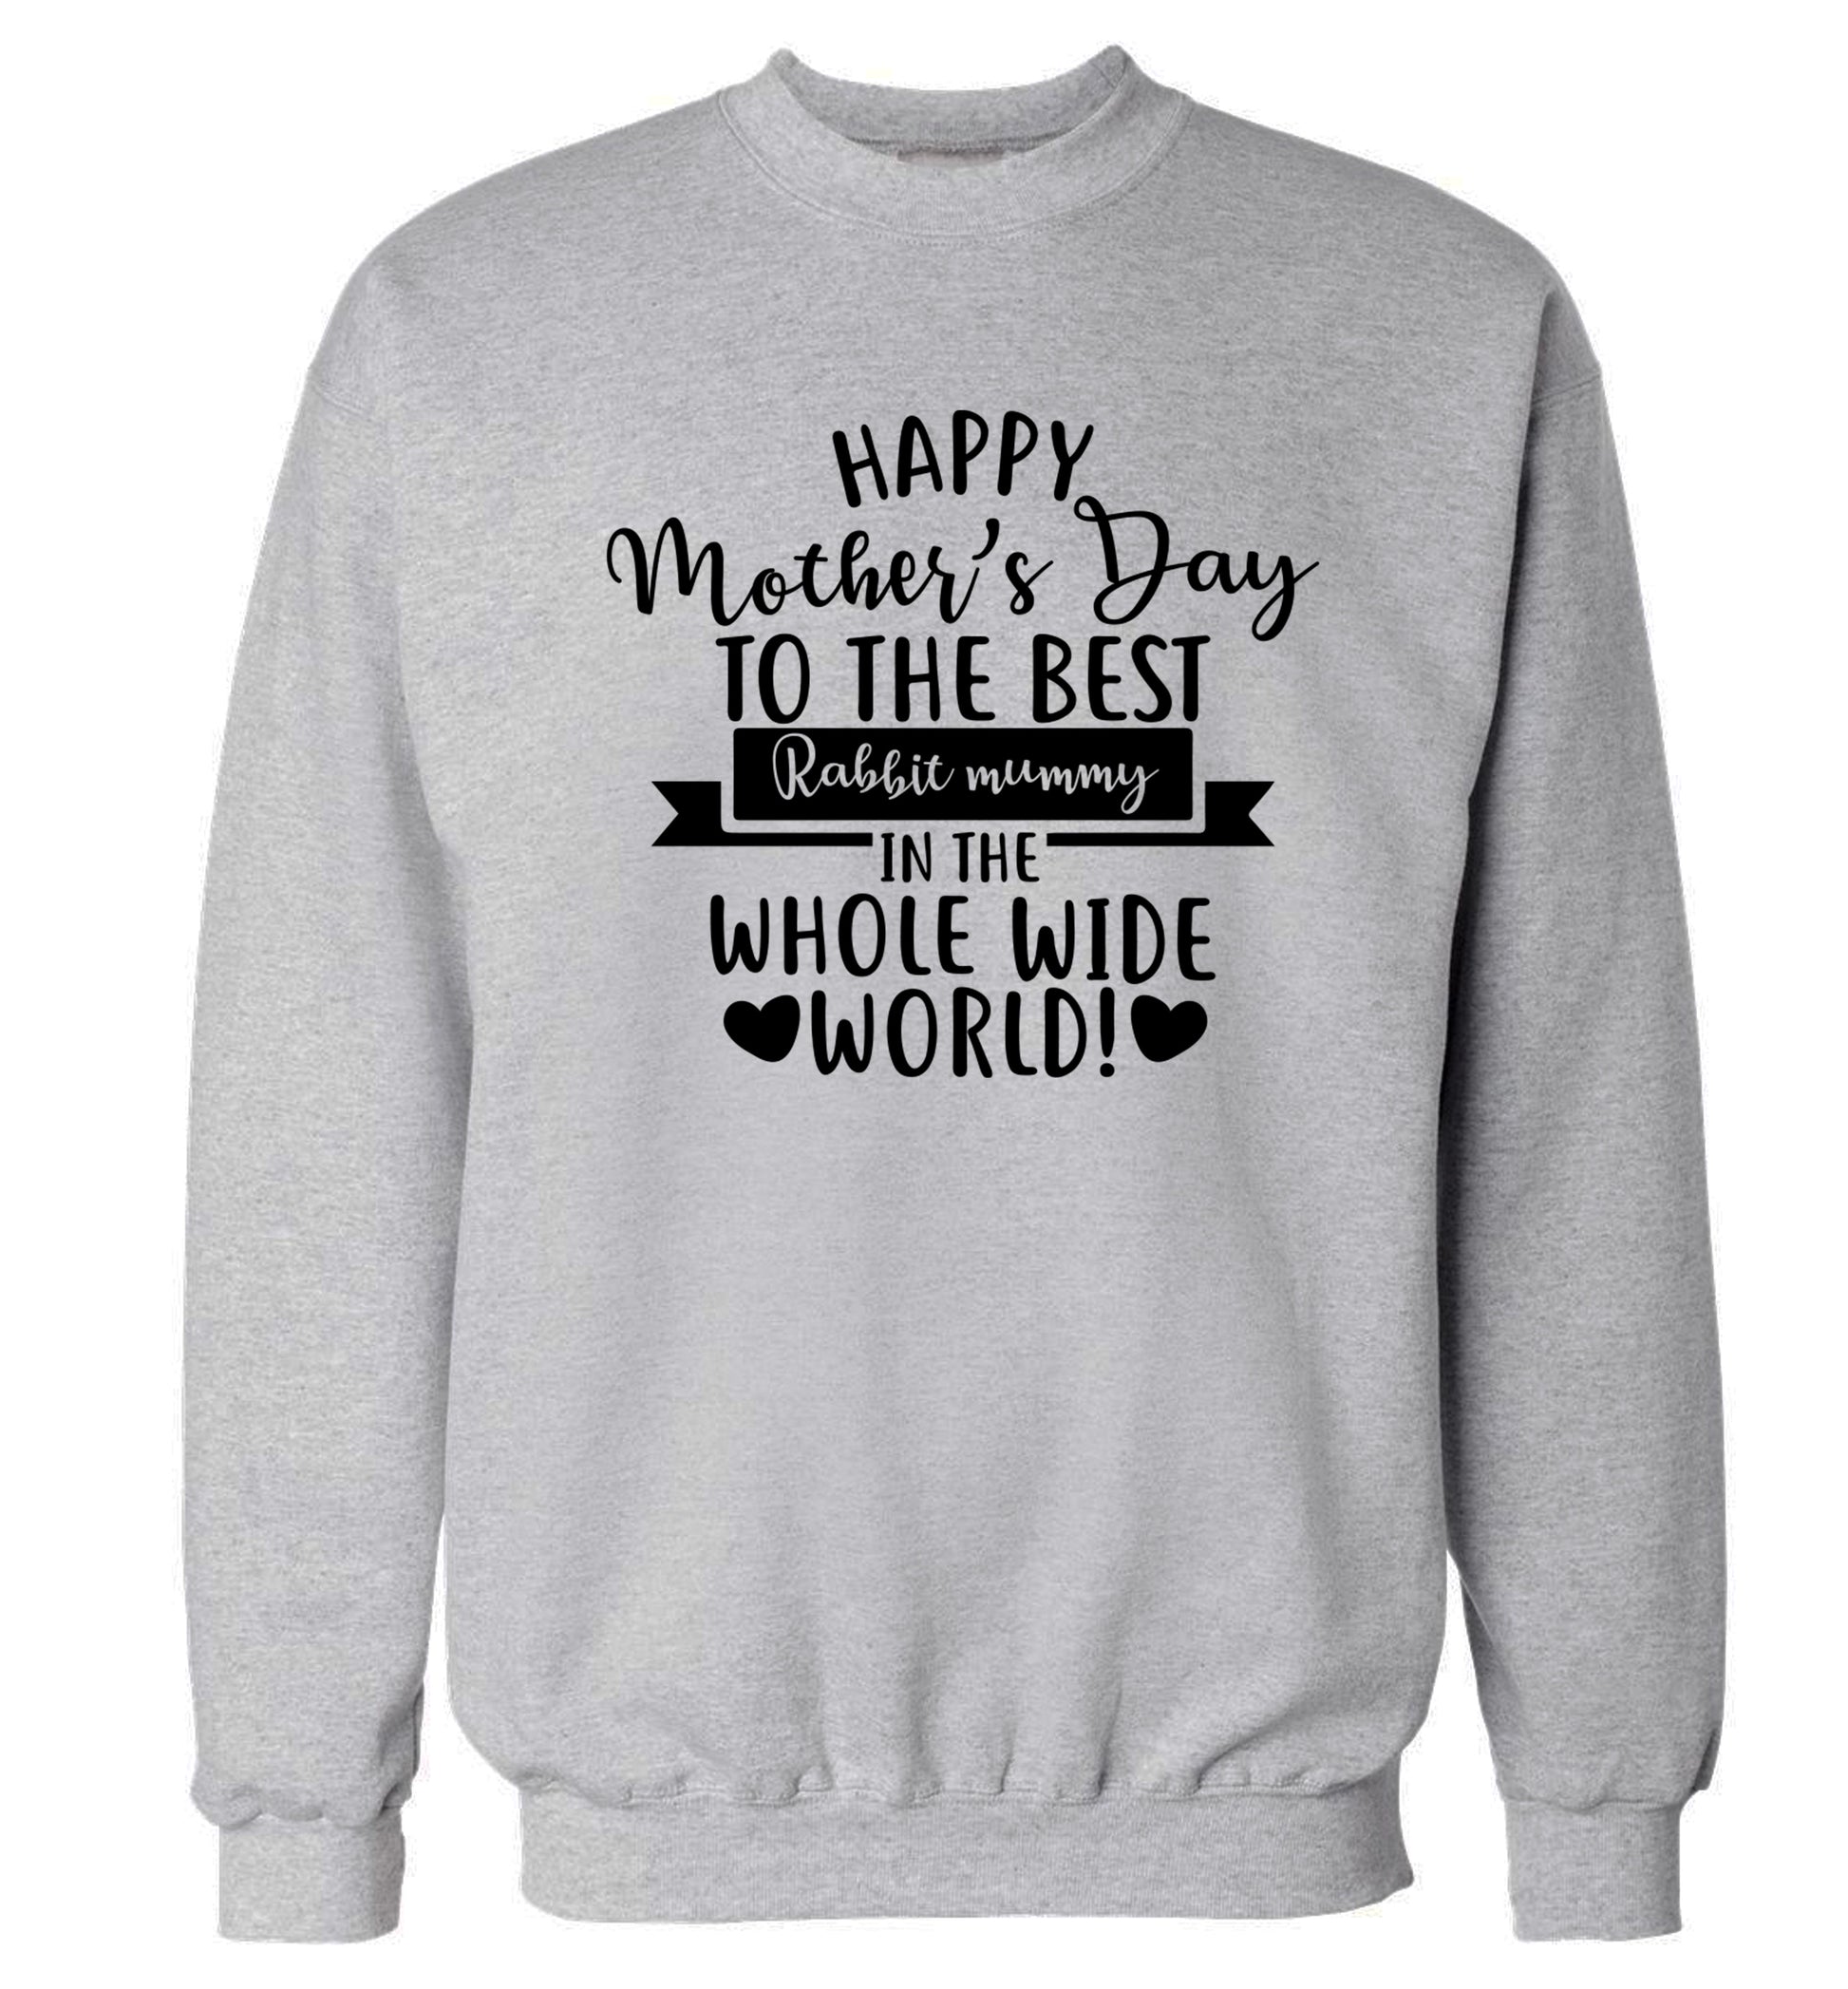 Happy mother's day to the best rabbit mummy in the world Adult's unisex grey Sweater 2XL